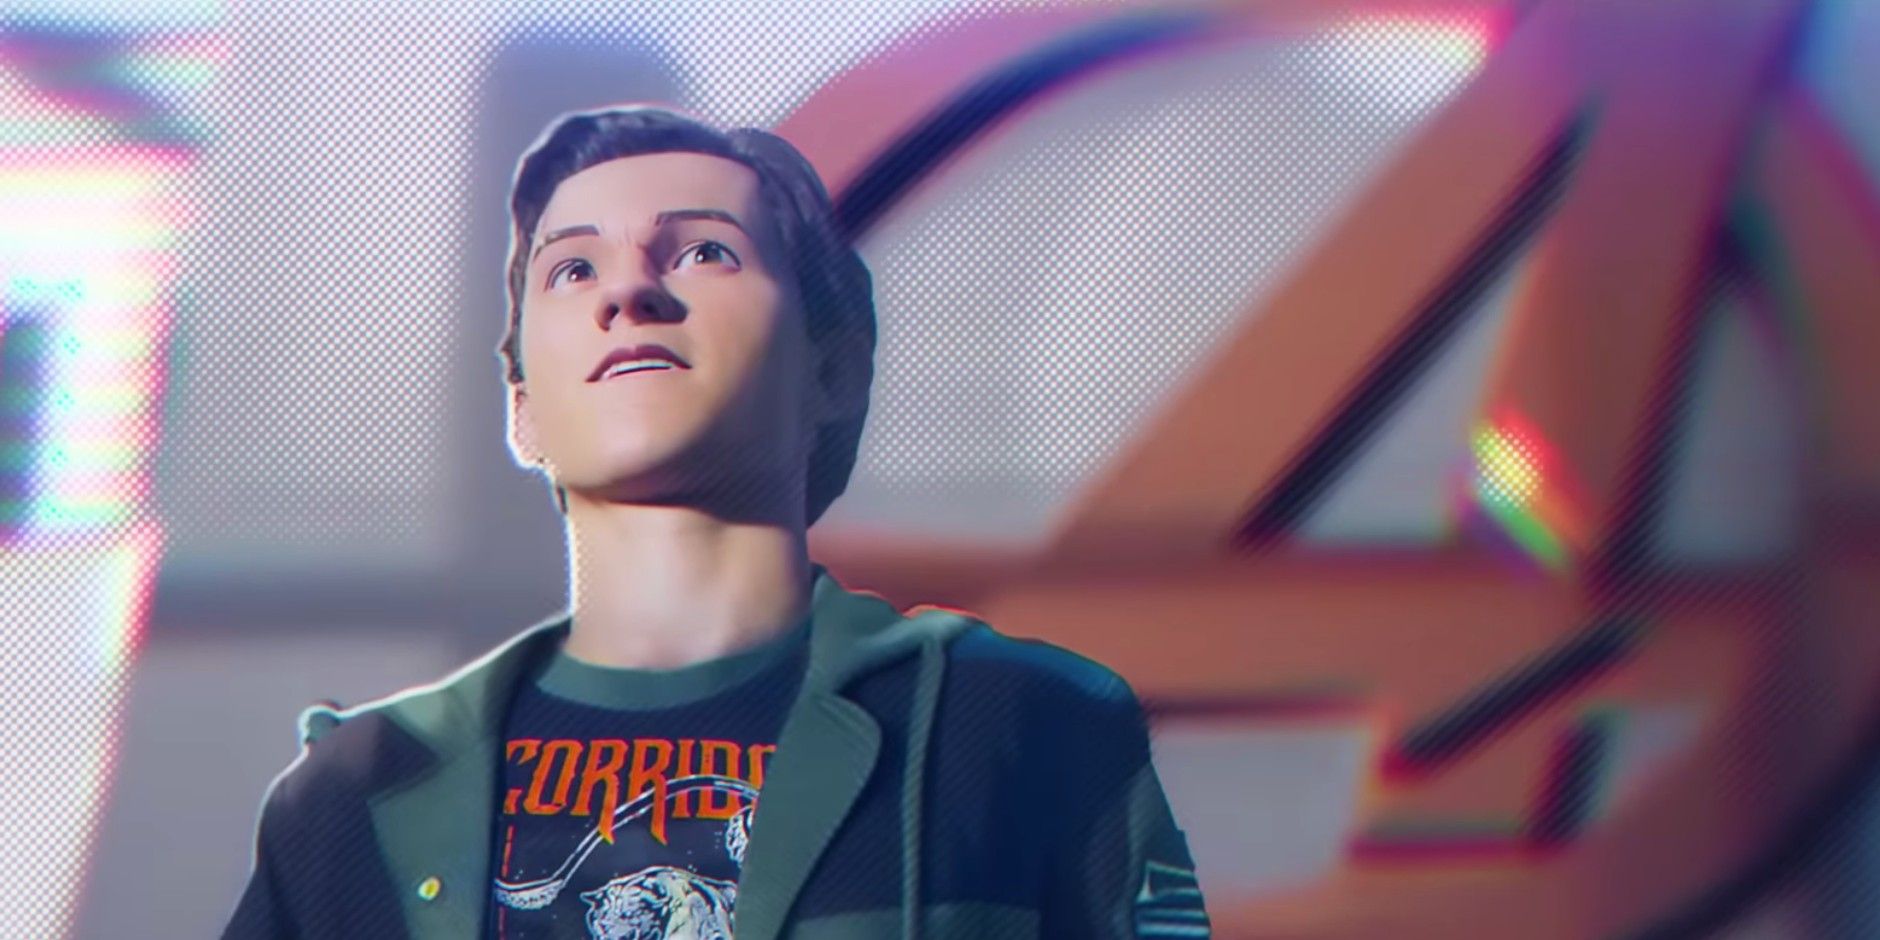 Tom Holland in Spider-Verse style in front of Avengers logo